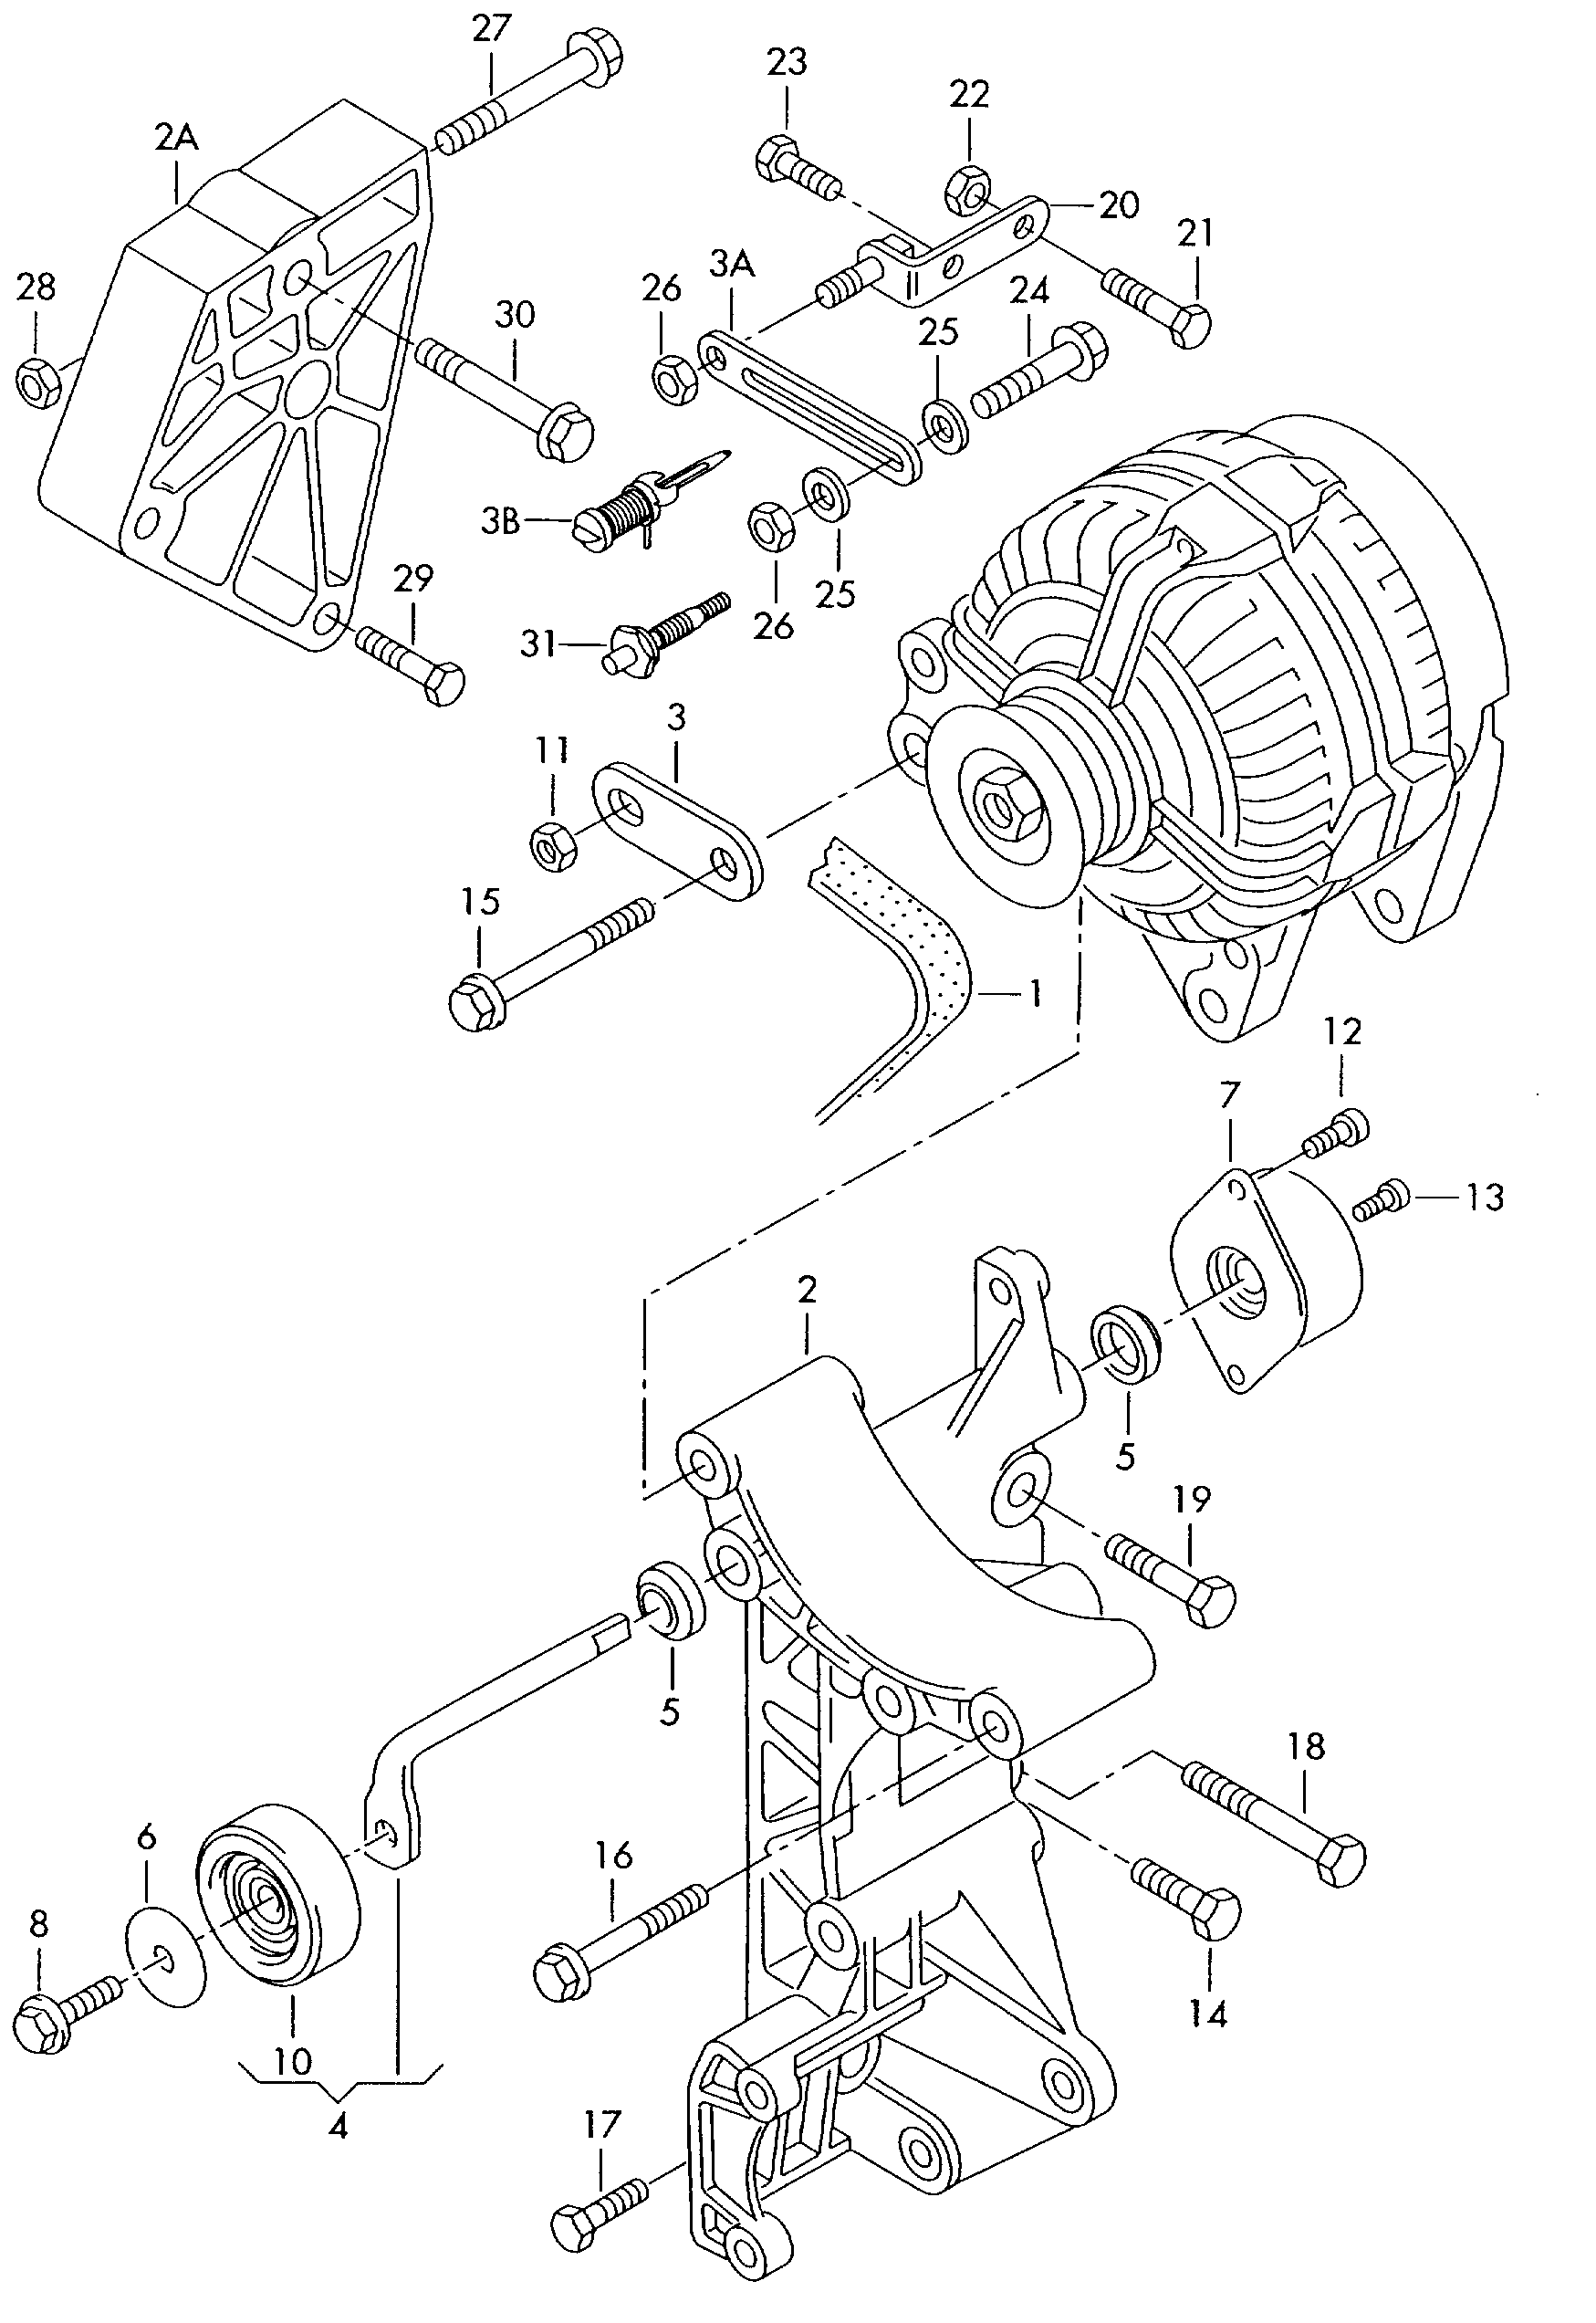 connecting and mounting parts<br>for alternatorPoly-V-belt 1.0 Ltr. - Fabia - fab